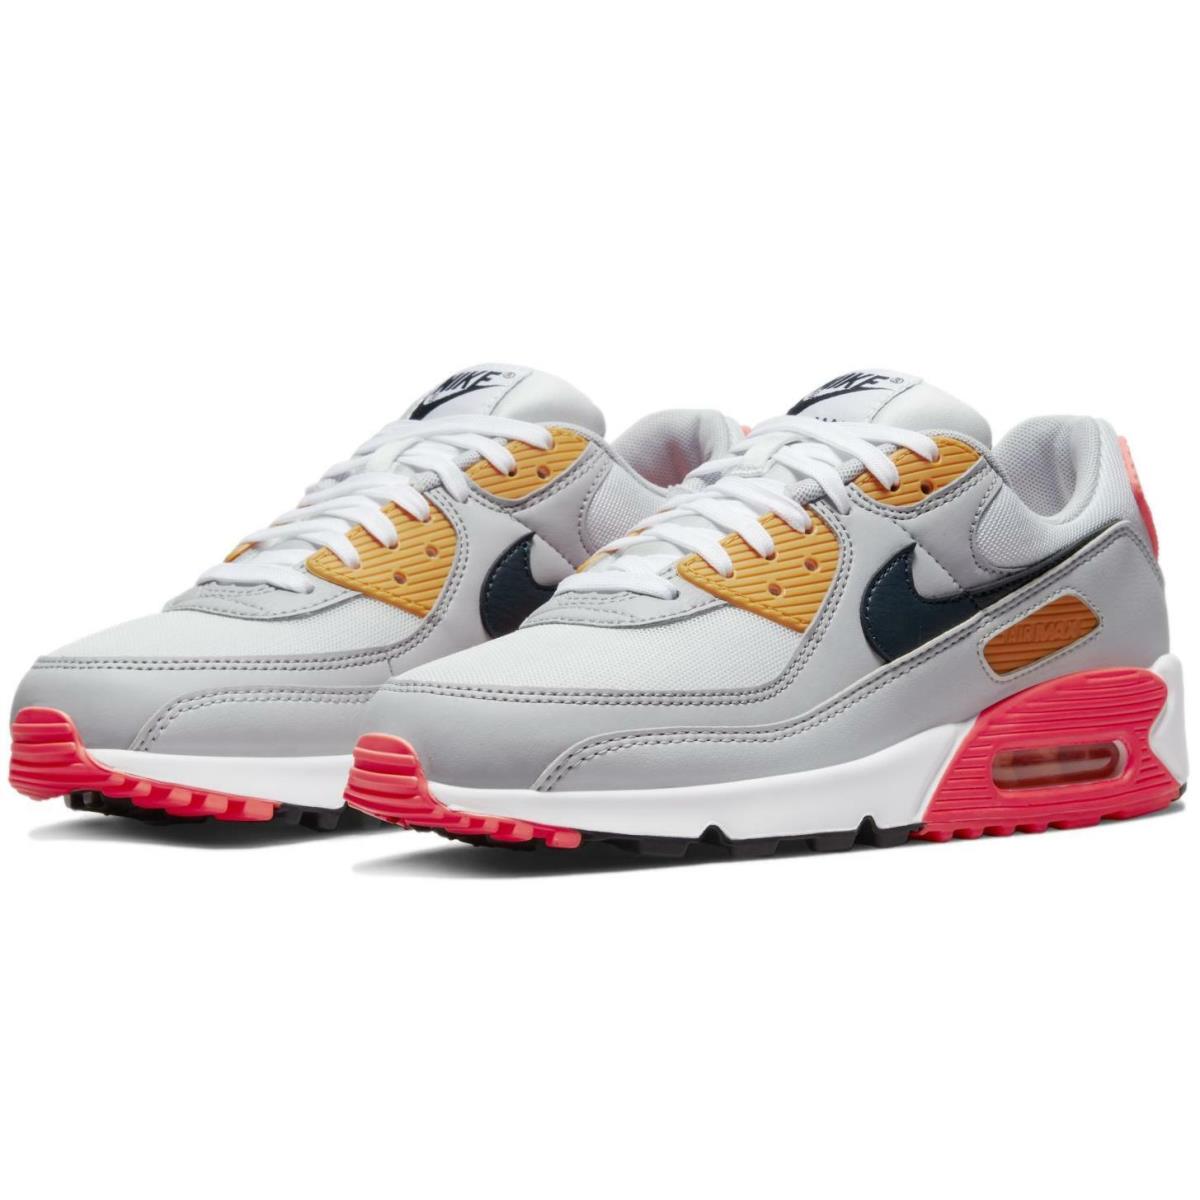 Nike Women`s Air Max 90 `grey Crimson Gold` Shoes Sneakers DH5072-001